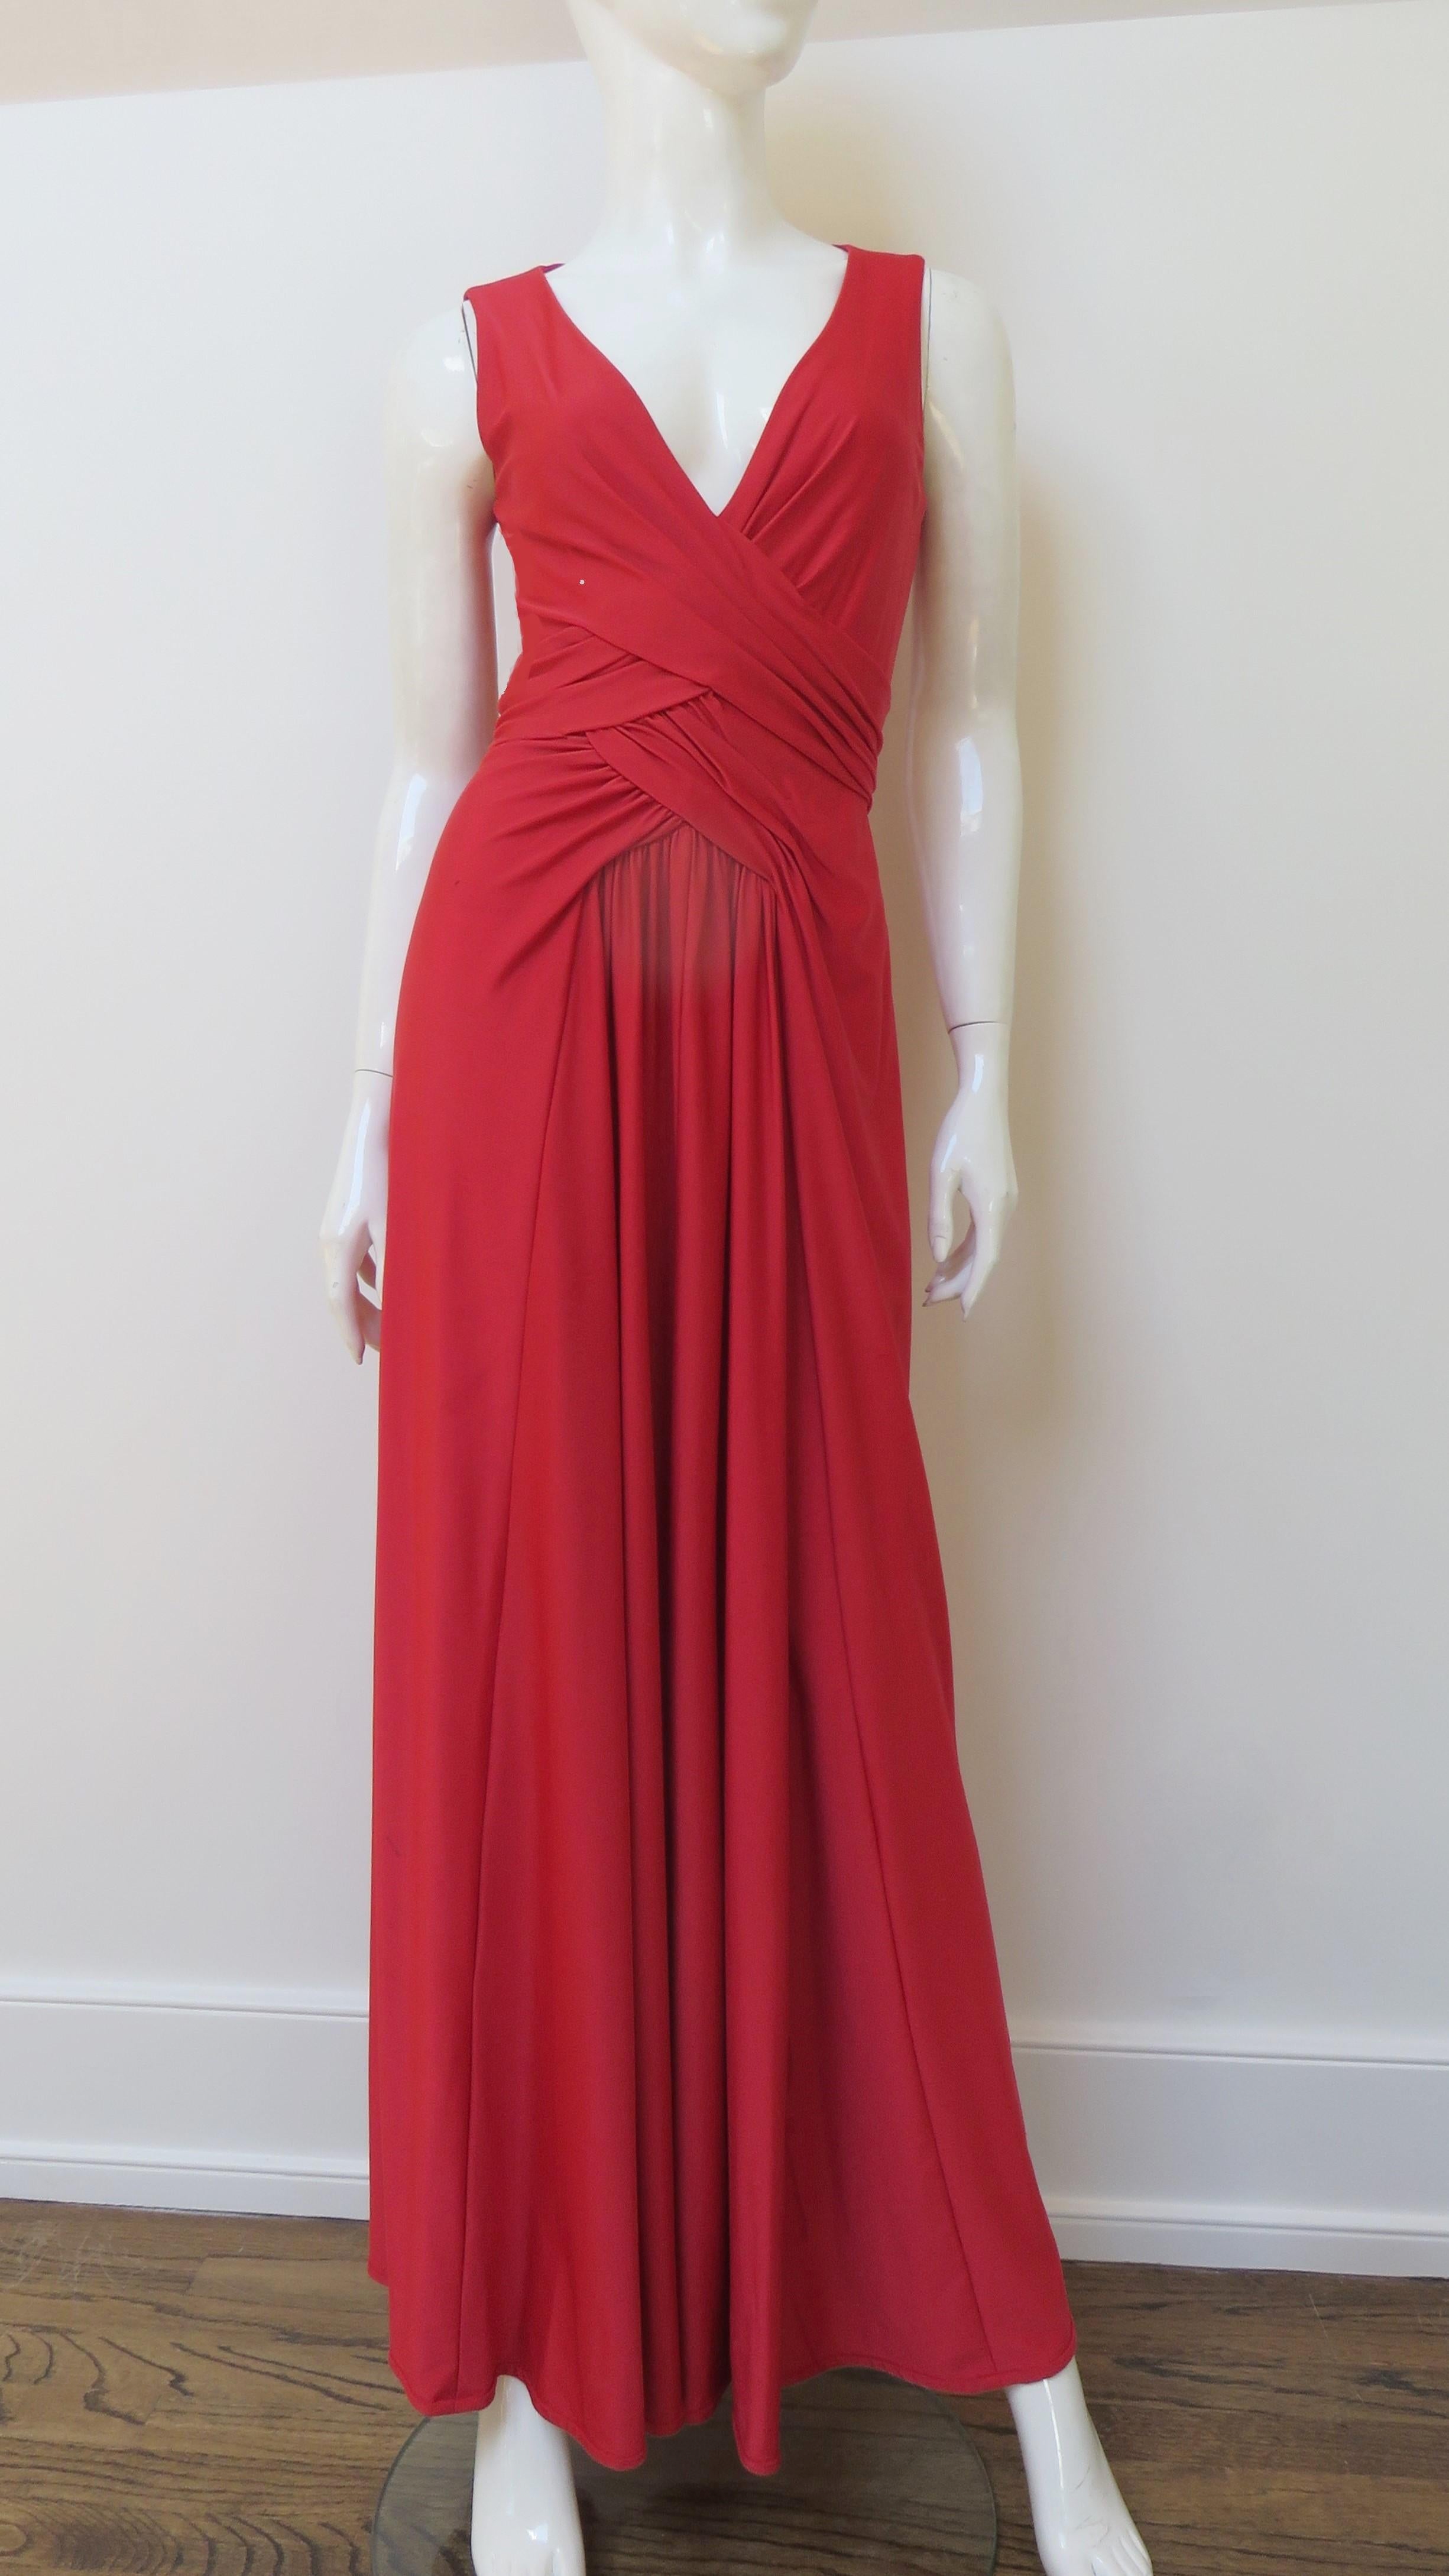 A fabulous red jersey maxi dress from Robert David Morton.  It is sleeveless with a deep V neckline and panels of ruching crossing at the midriff and waist.  It is unlined and has a center back zipper.
Fits sizes Small, Medium.  Marked US size